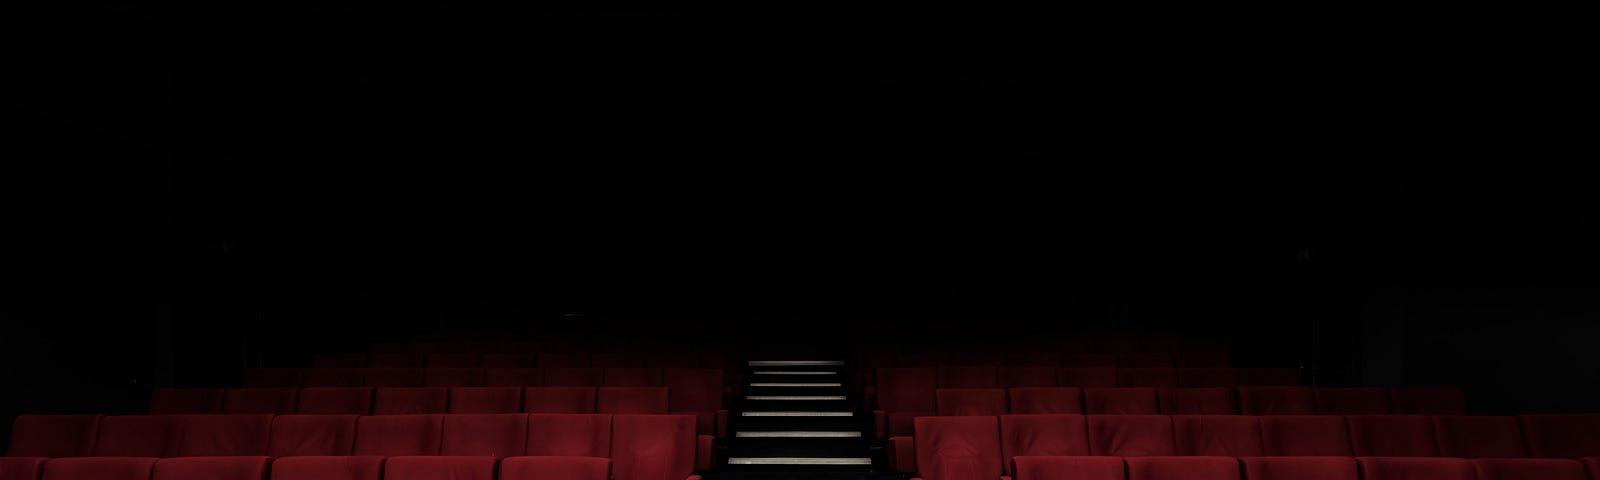 Looking up cinema stairs at the seats.